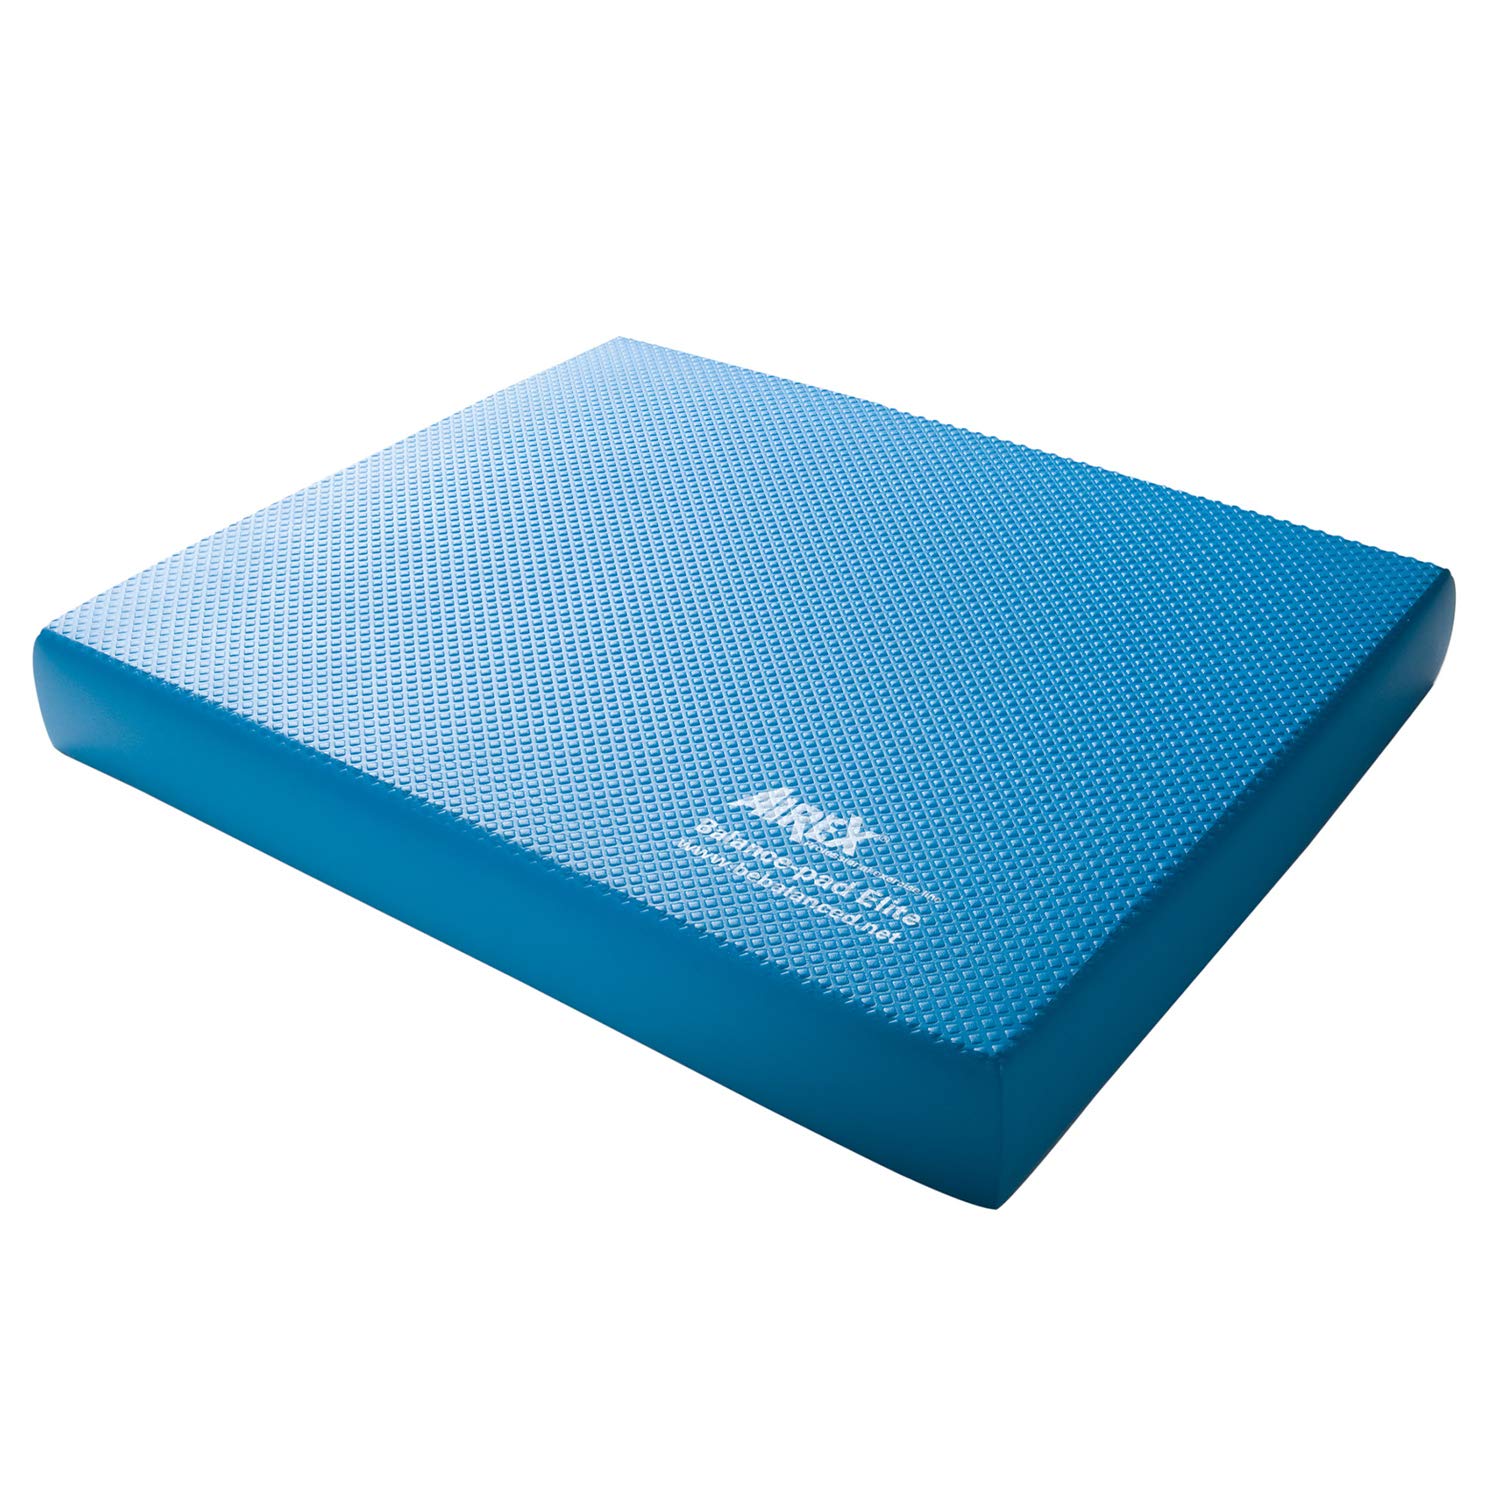 AIREX Balance Pads - Official Pad for Physical Therapy, Rehabilitation